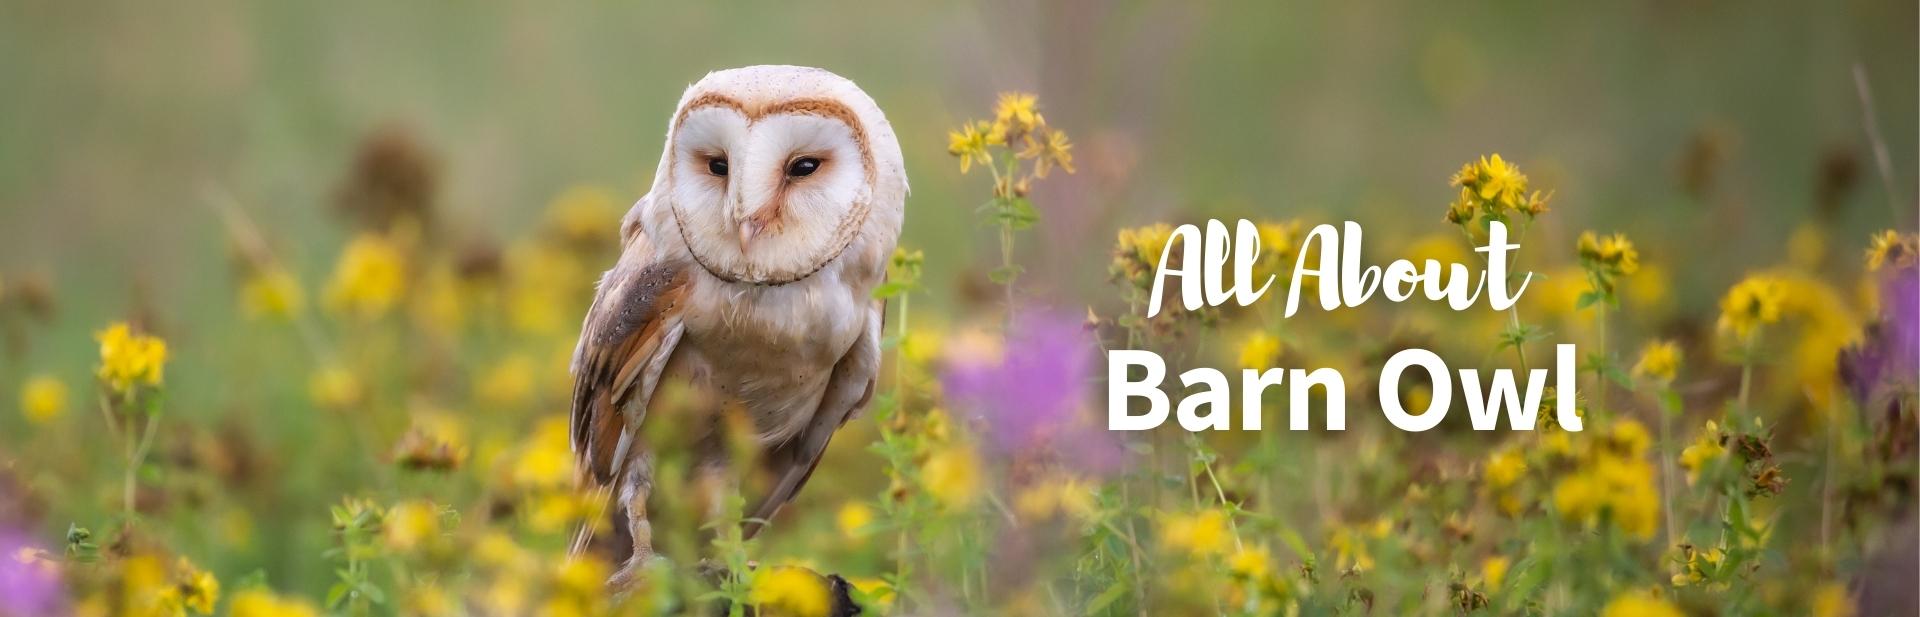 Barn Owl: The Ghostly Bird of Prey With a Heart-Shaped Face - Outforia